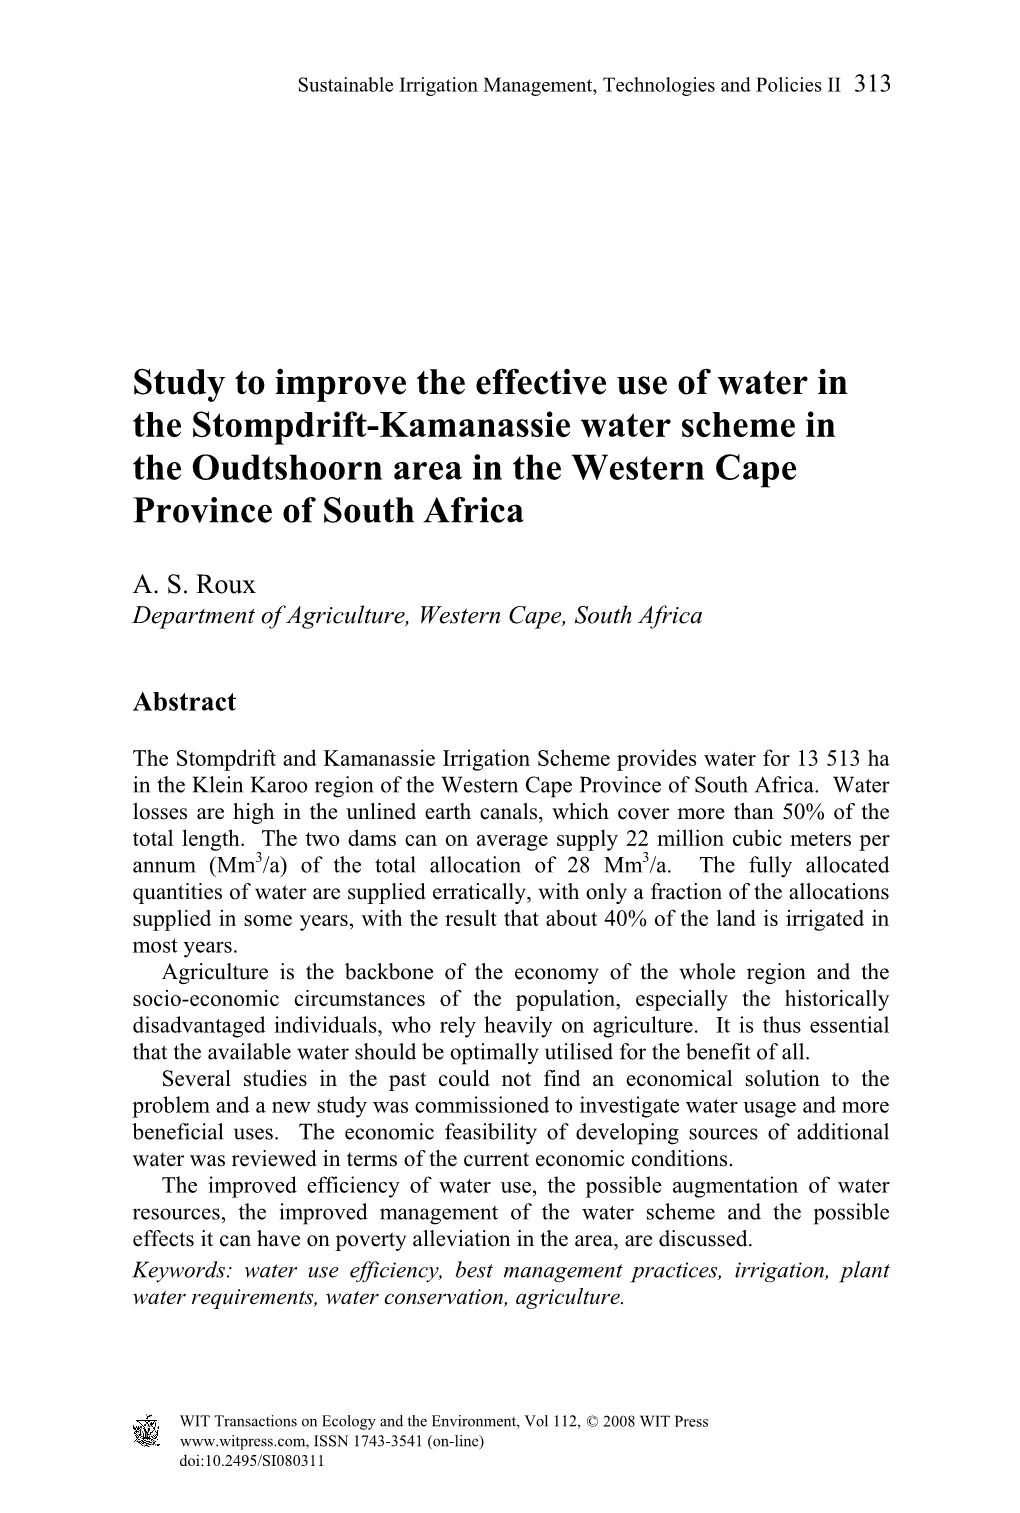 Study to Improve the Effective Use of Water in the Stompdrift-Kamanassie Water Scheme in the Oudtshoorn Area in the Western Cape Province of South Africa